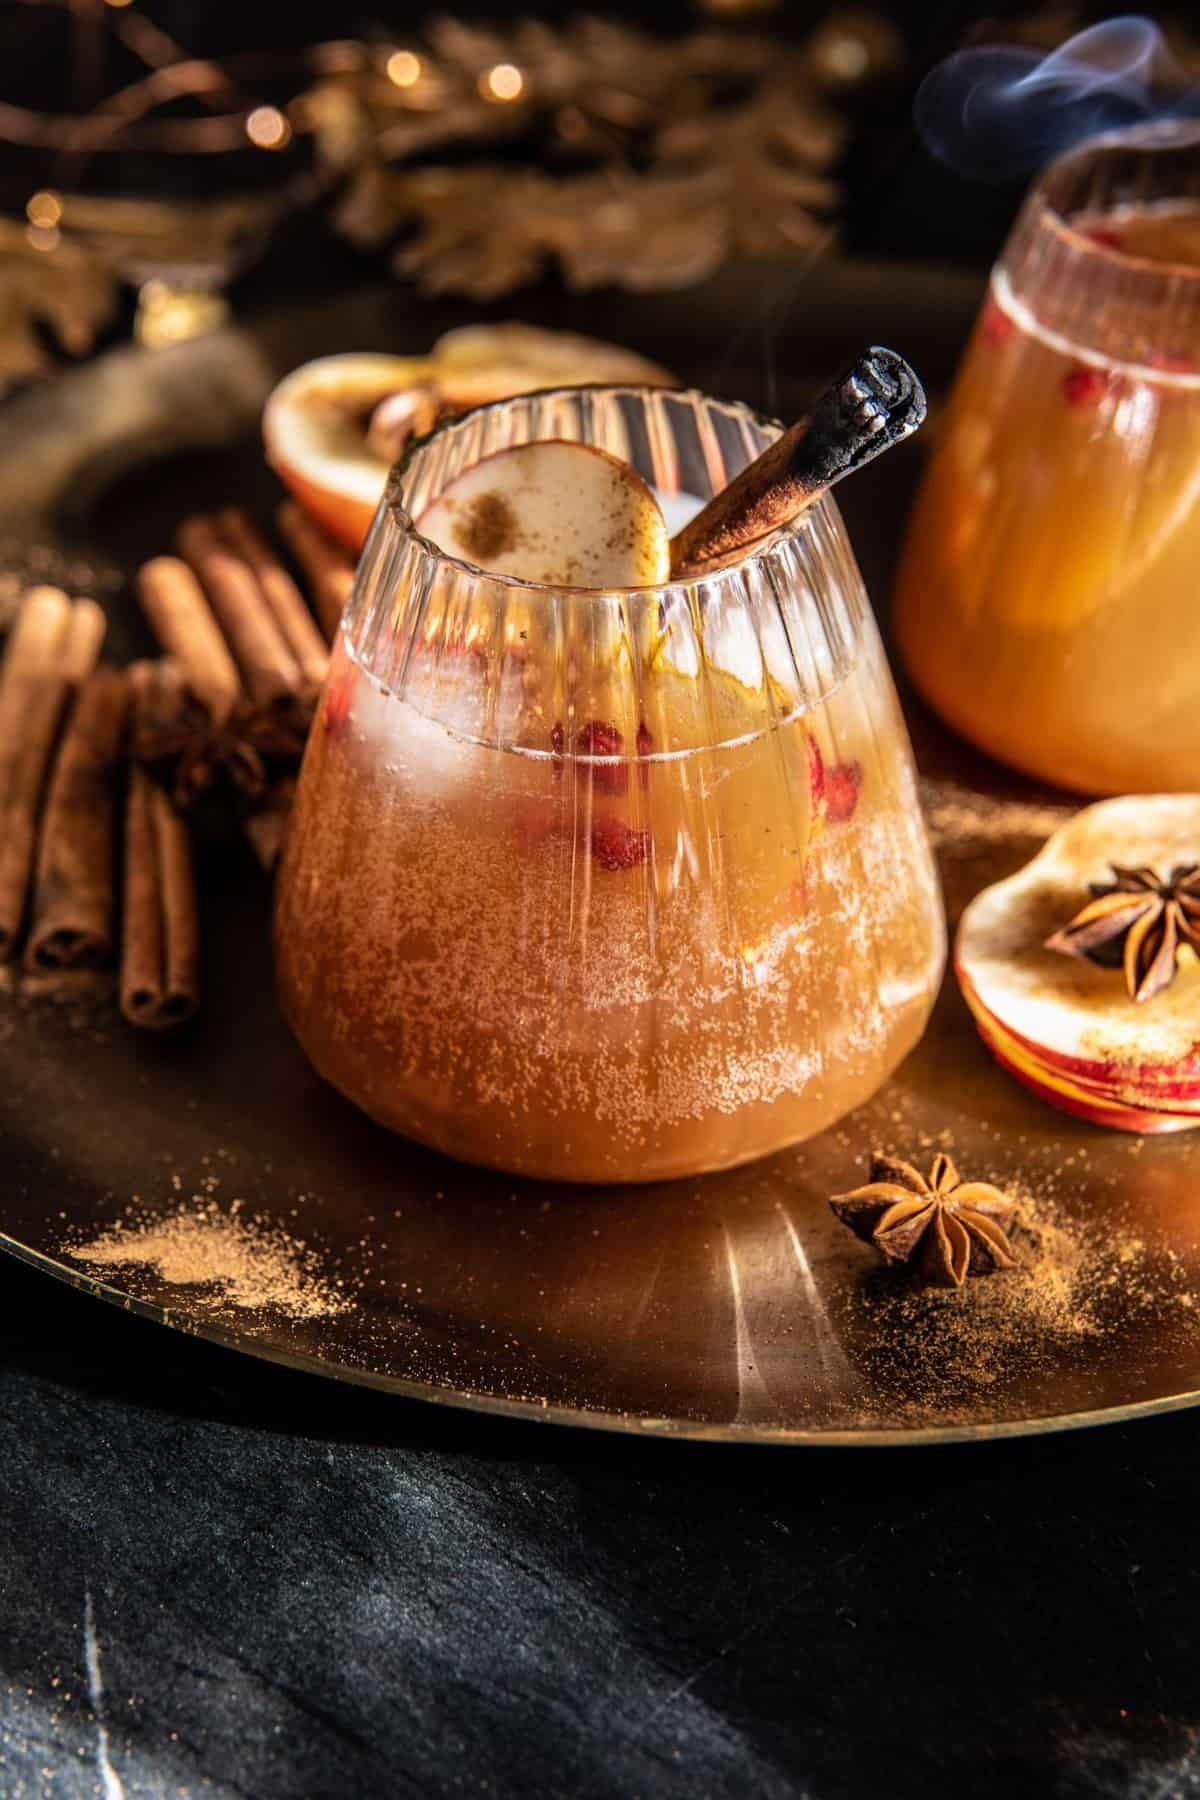 A cinnamon apple bourbon small in a glass with a smoked cinnamon stick and apple garnish